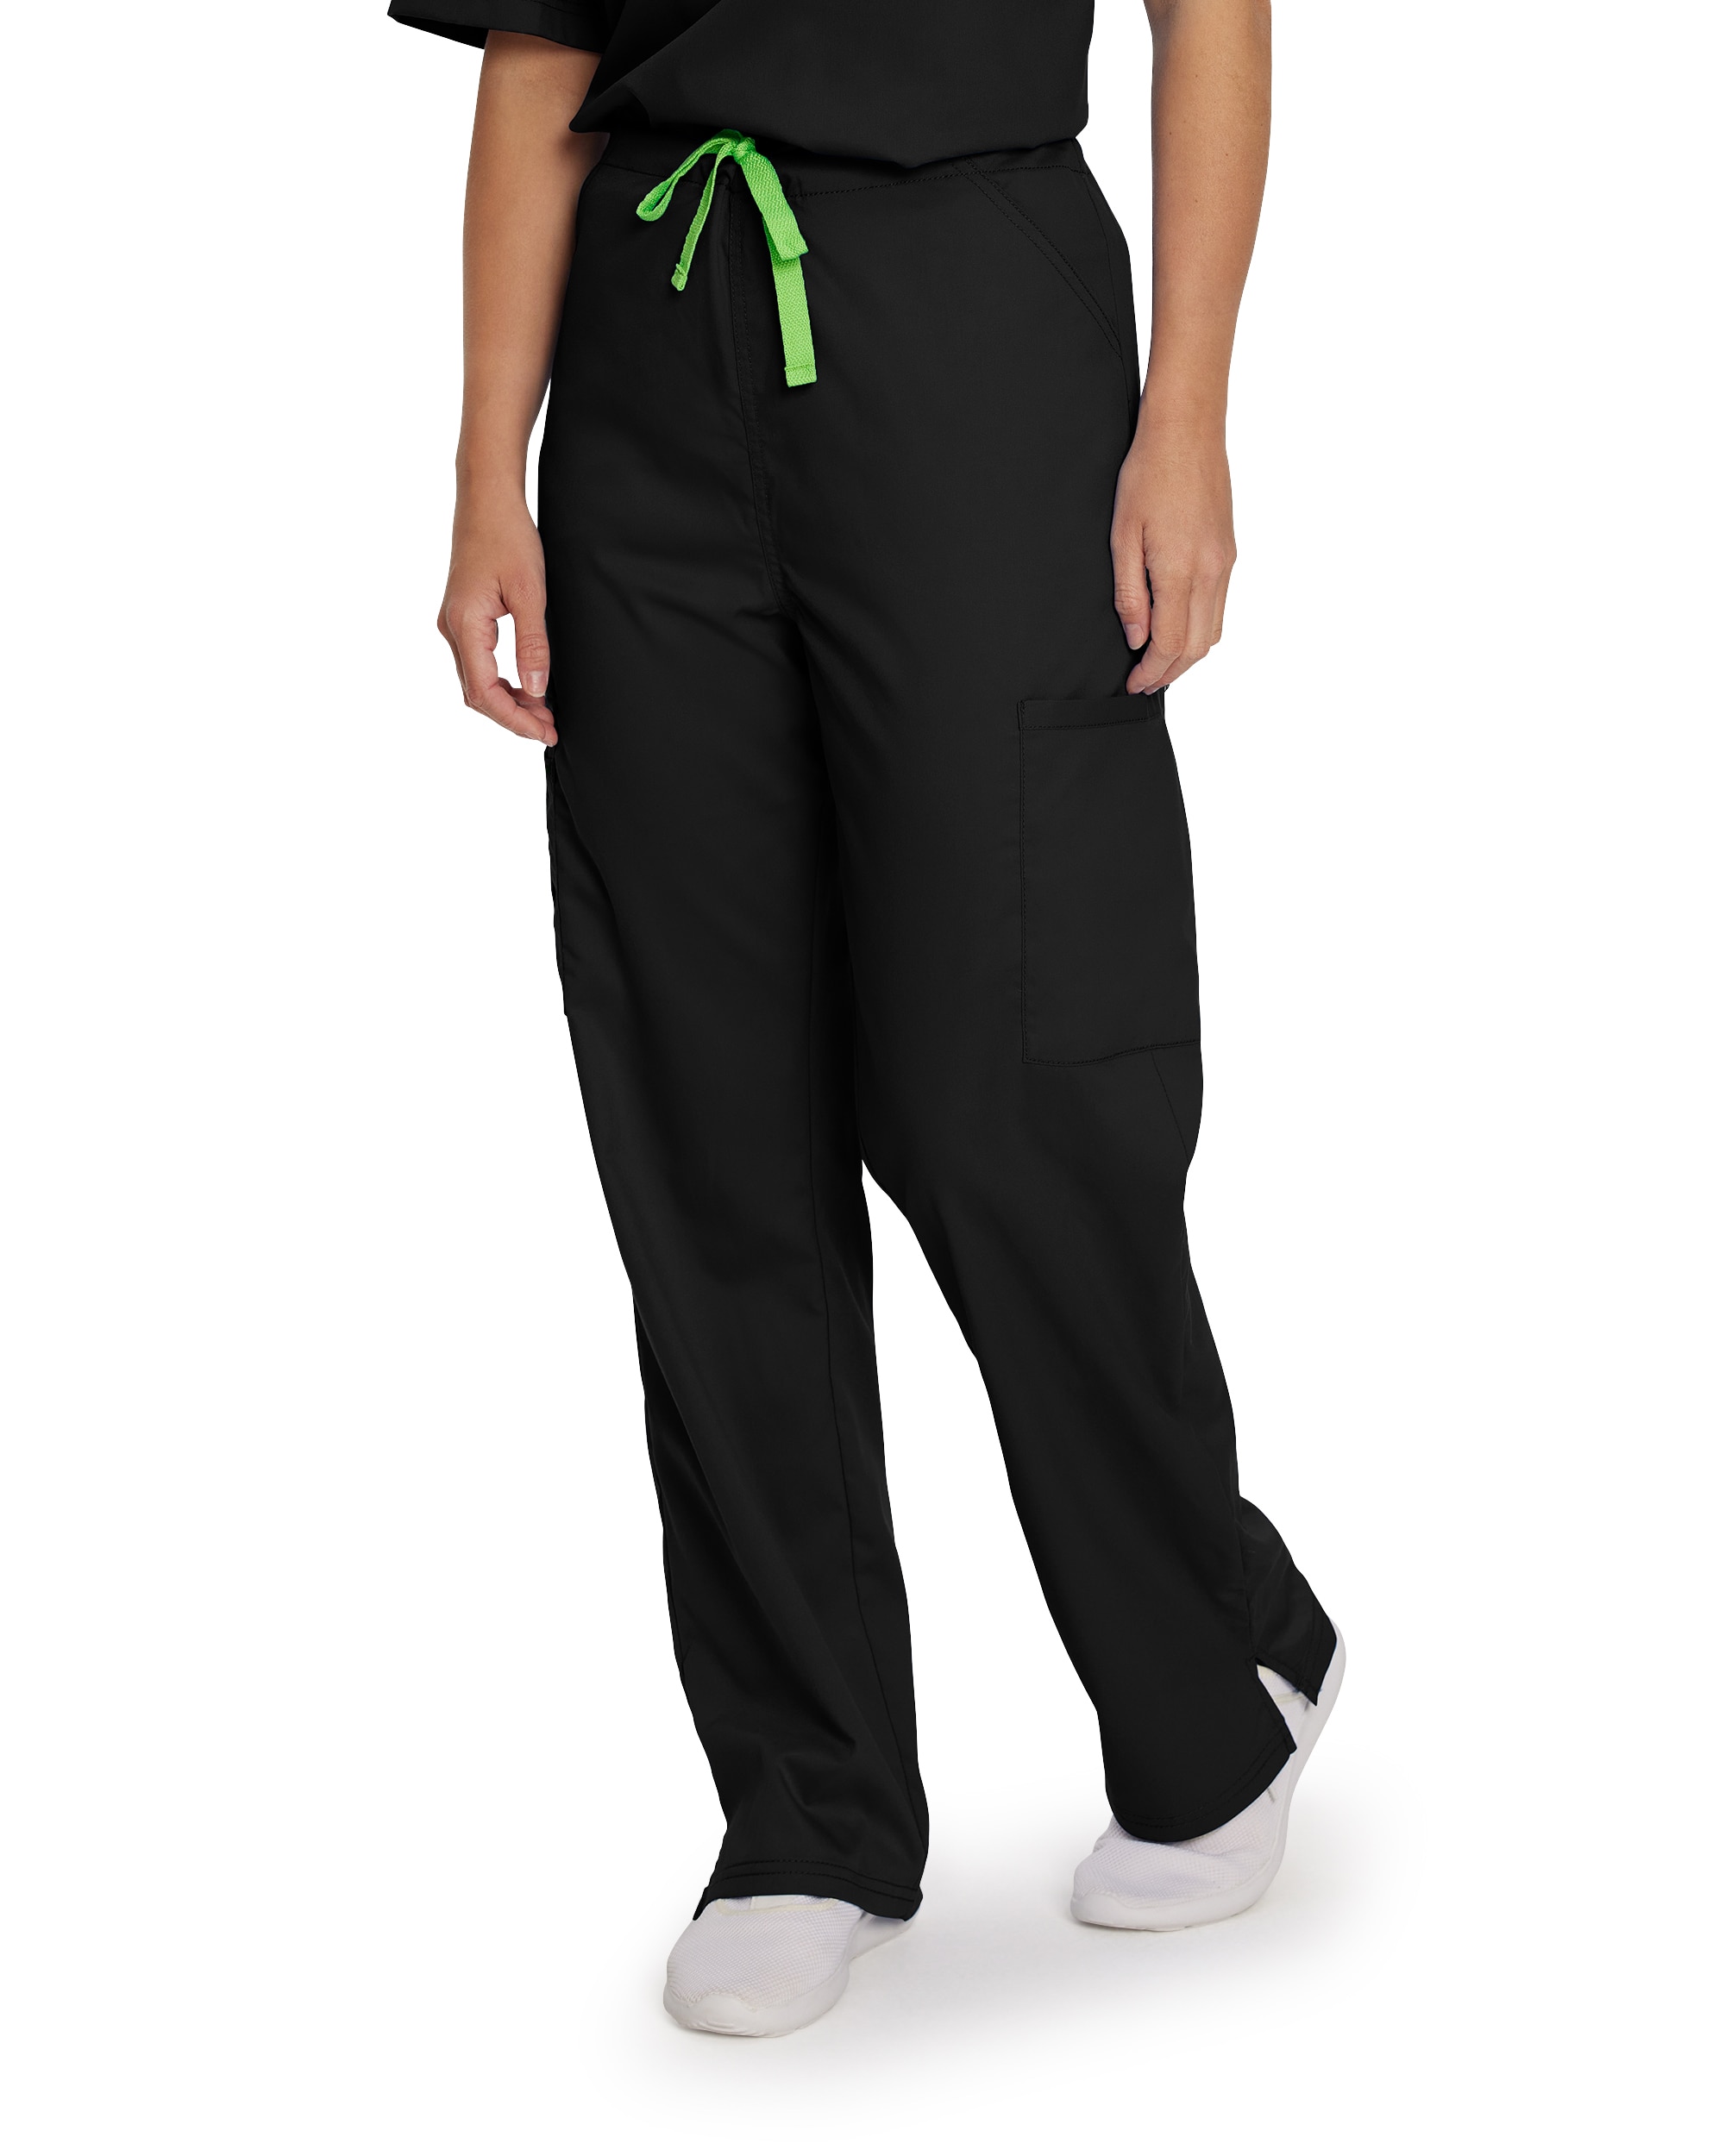 Unisex Pant with Cargo Pockets - Petite Length (2104)